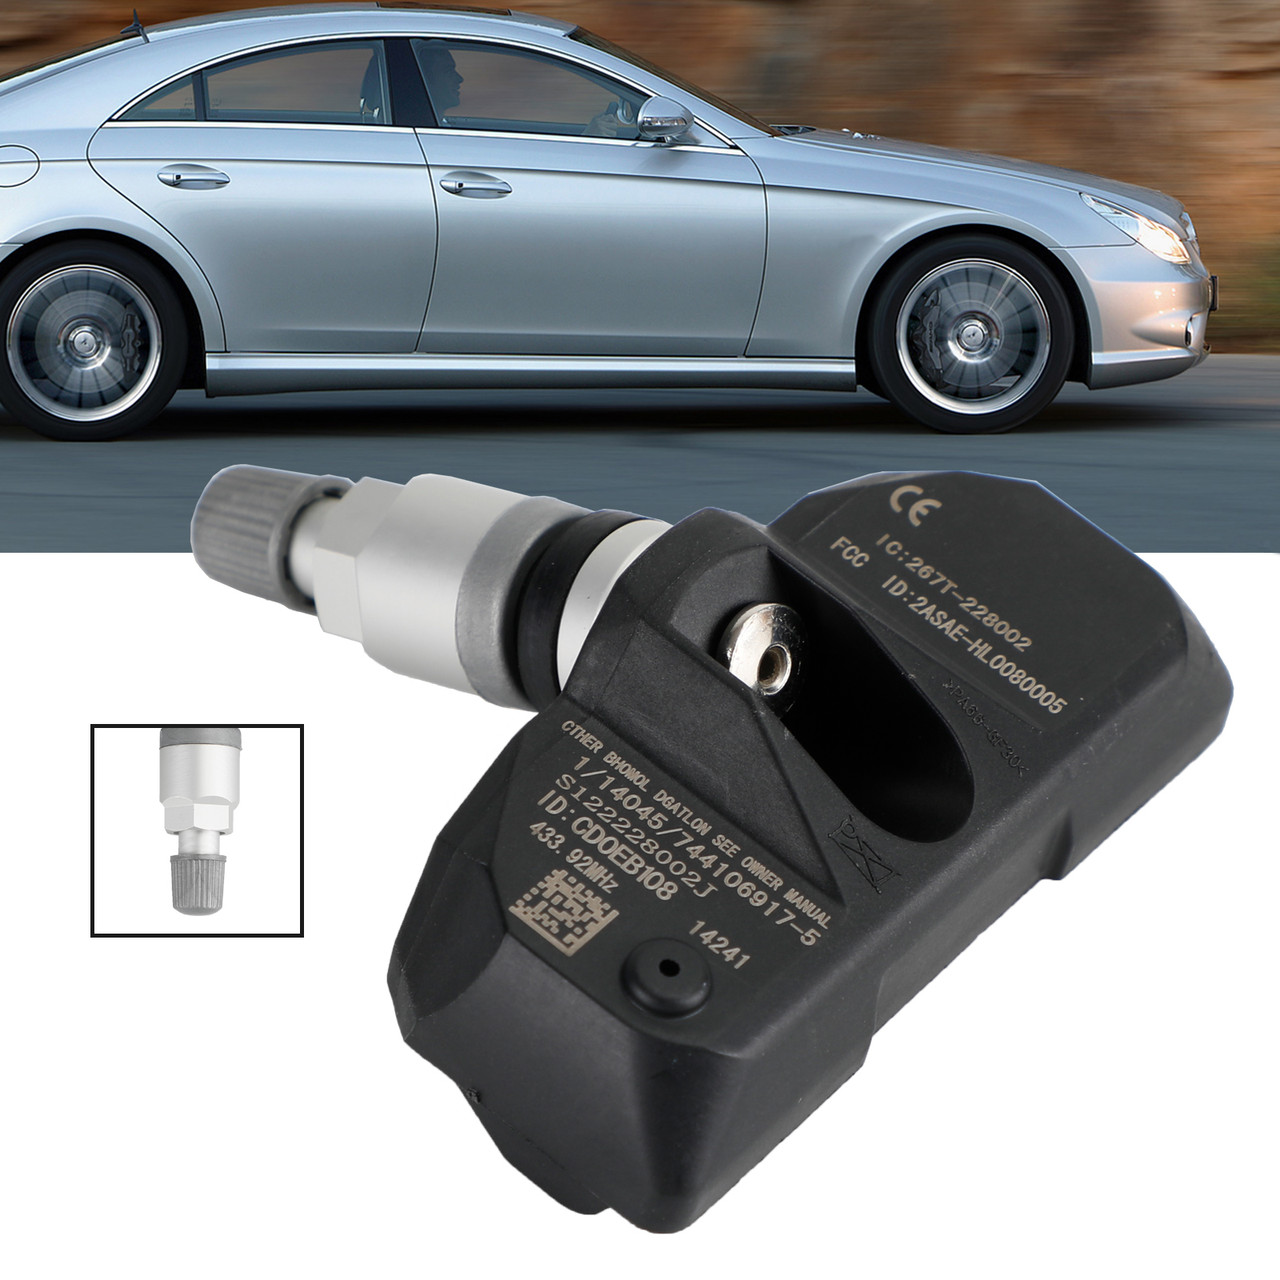 1x Tire Pressure Monitoring System Sensor A0025406717 For Benz GL550 GL320 S450